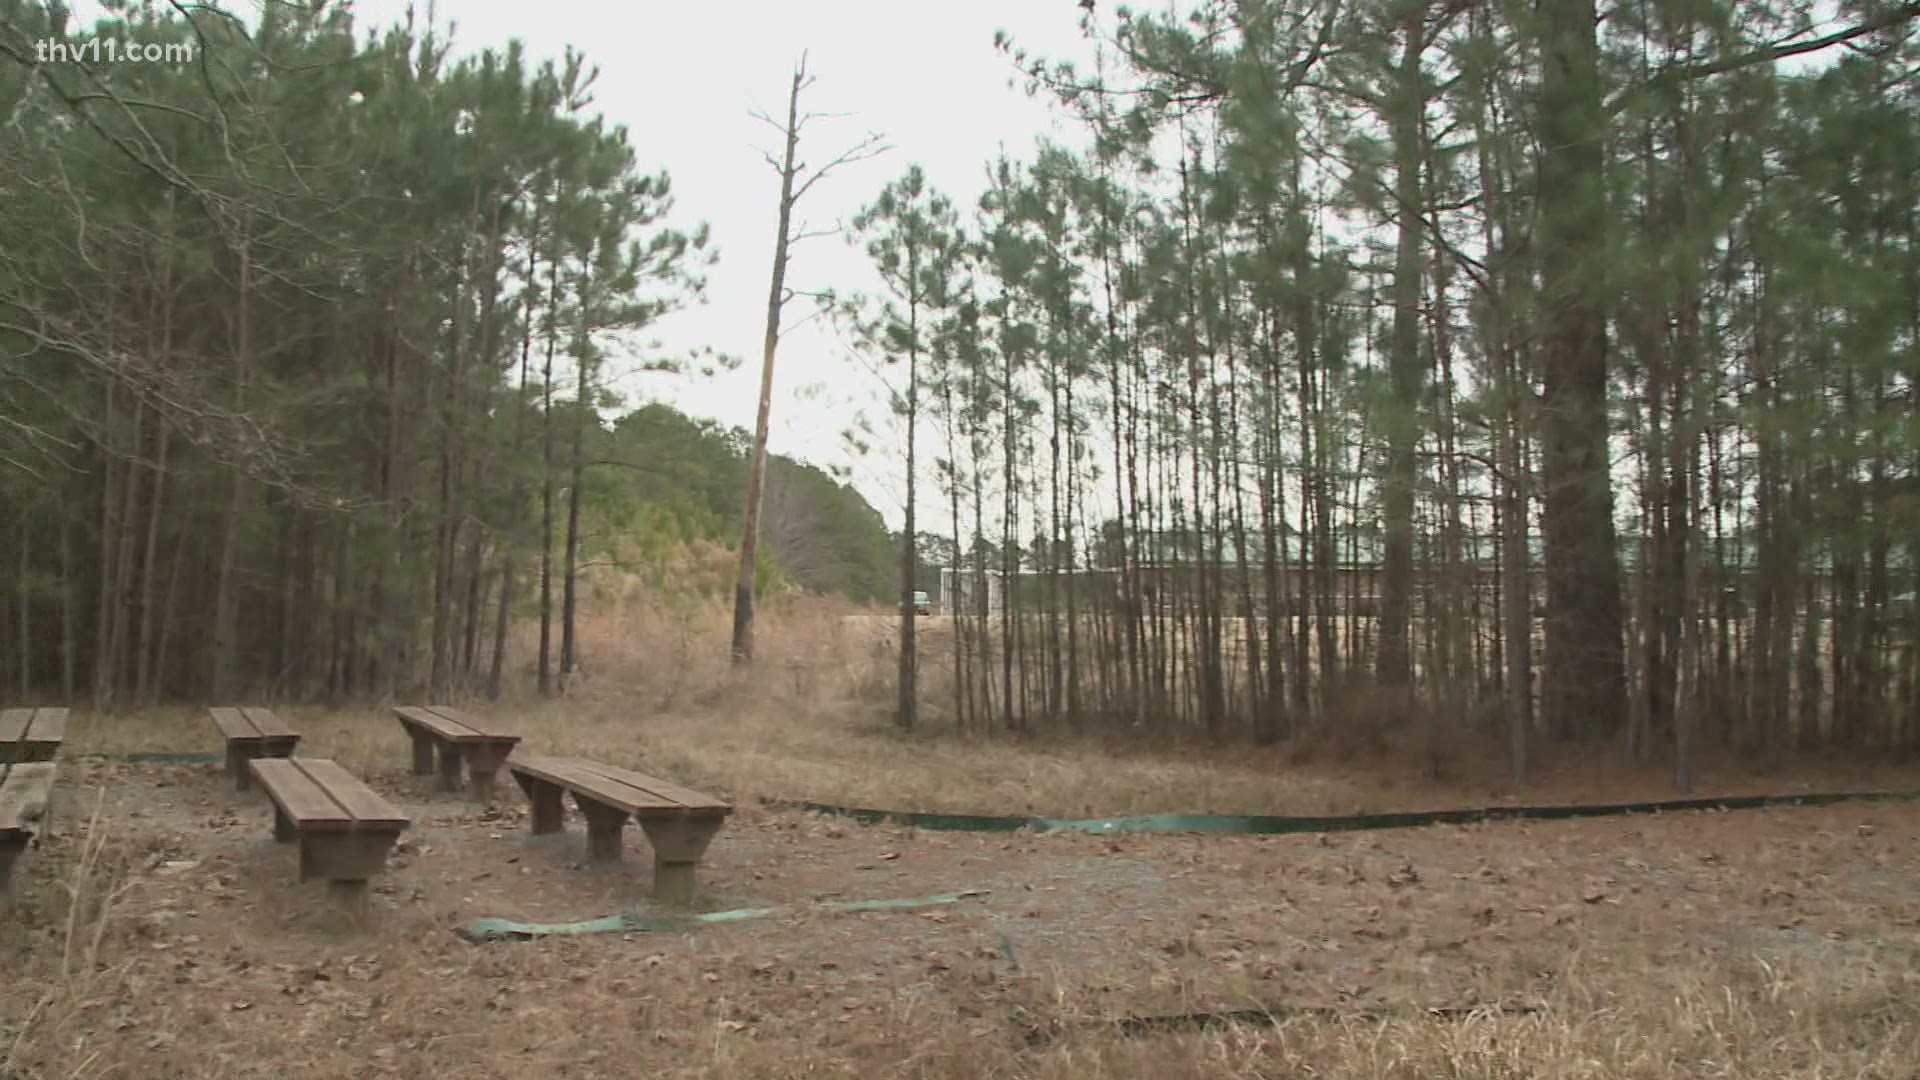 Two Daisy Bates Elementary teachers applied for a Conservation Education Grant from the Arkansas Game and Fish Commission to improve their outdoor classroom.